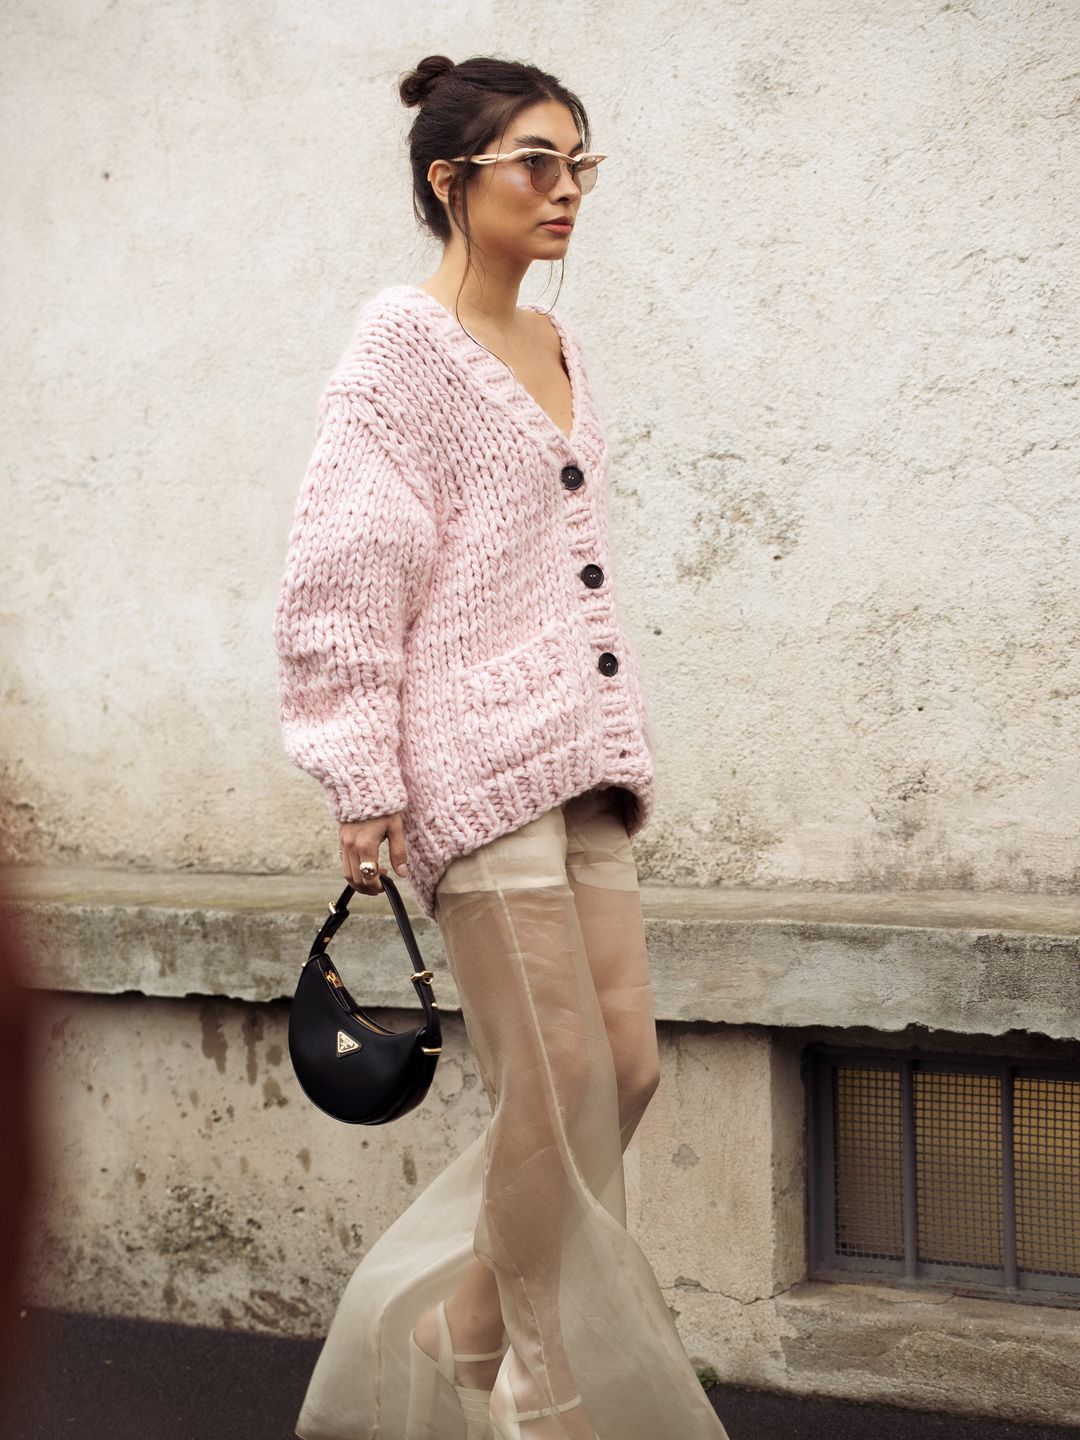 A guest wears a pink knitted cardigan, transparent beige wide pants, white platform shoes, and a black bag outside Prada